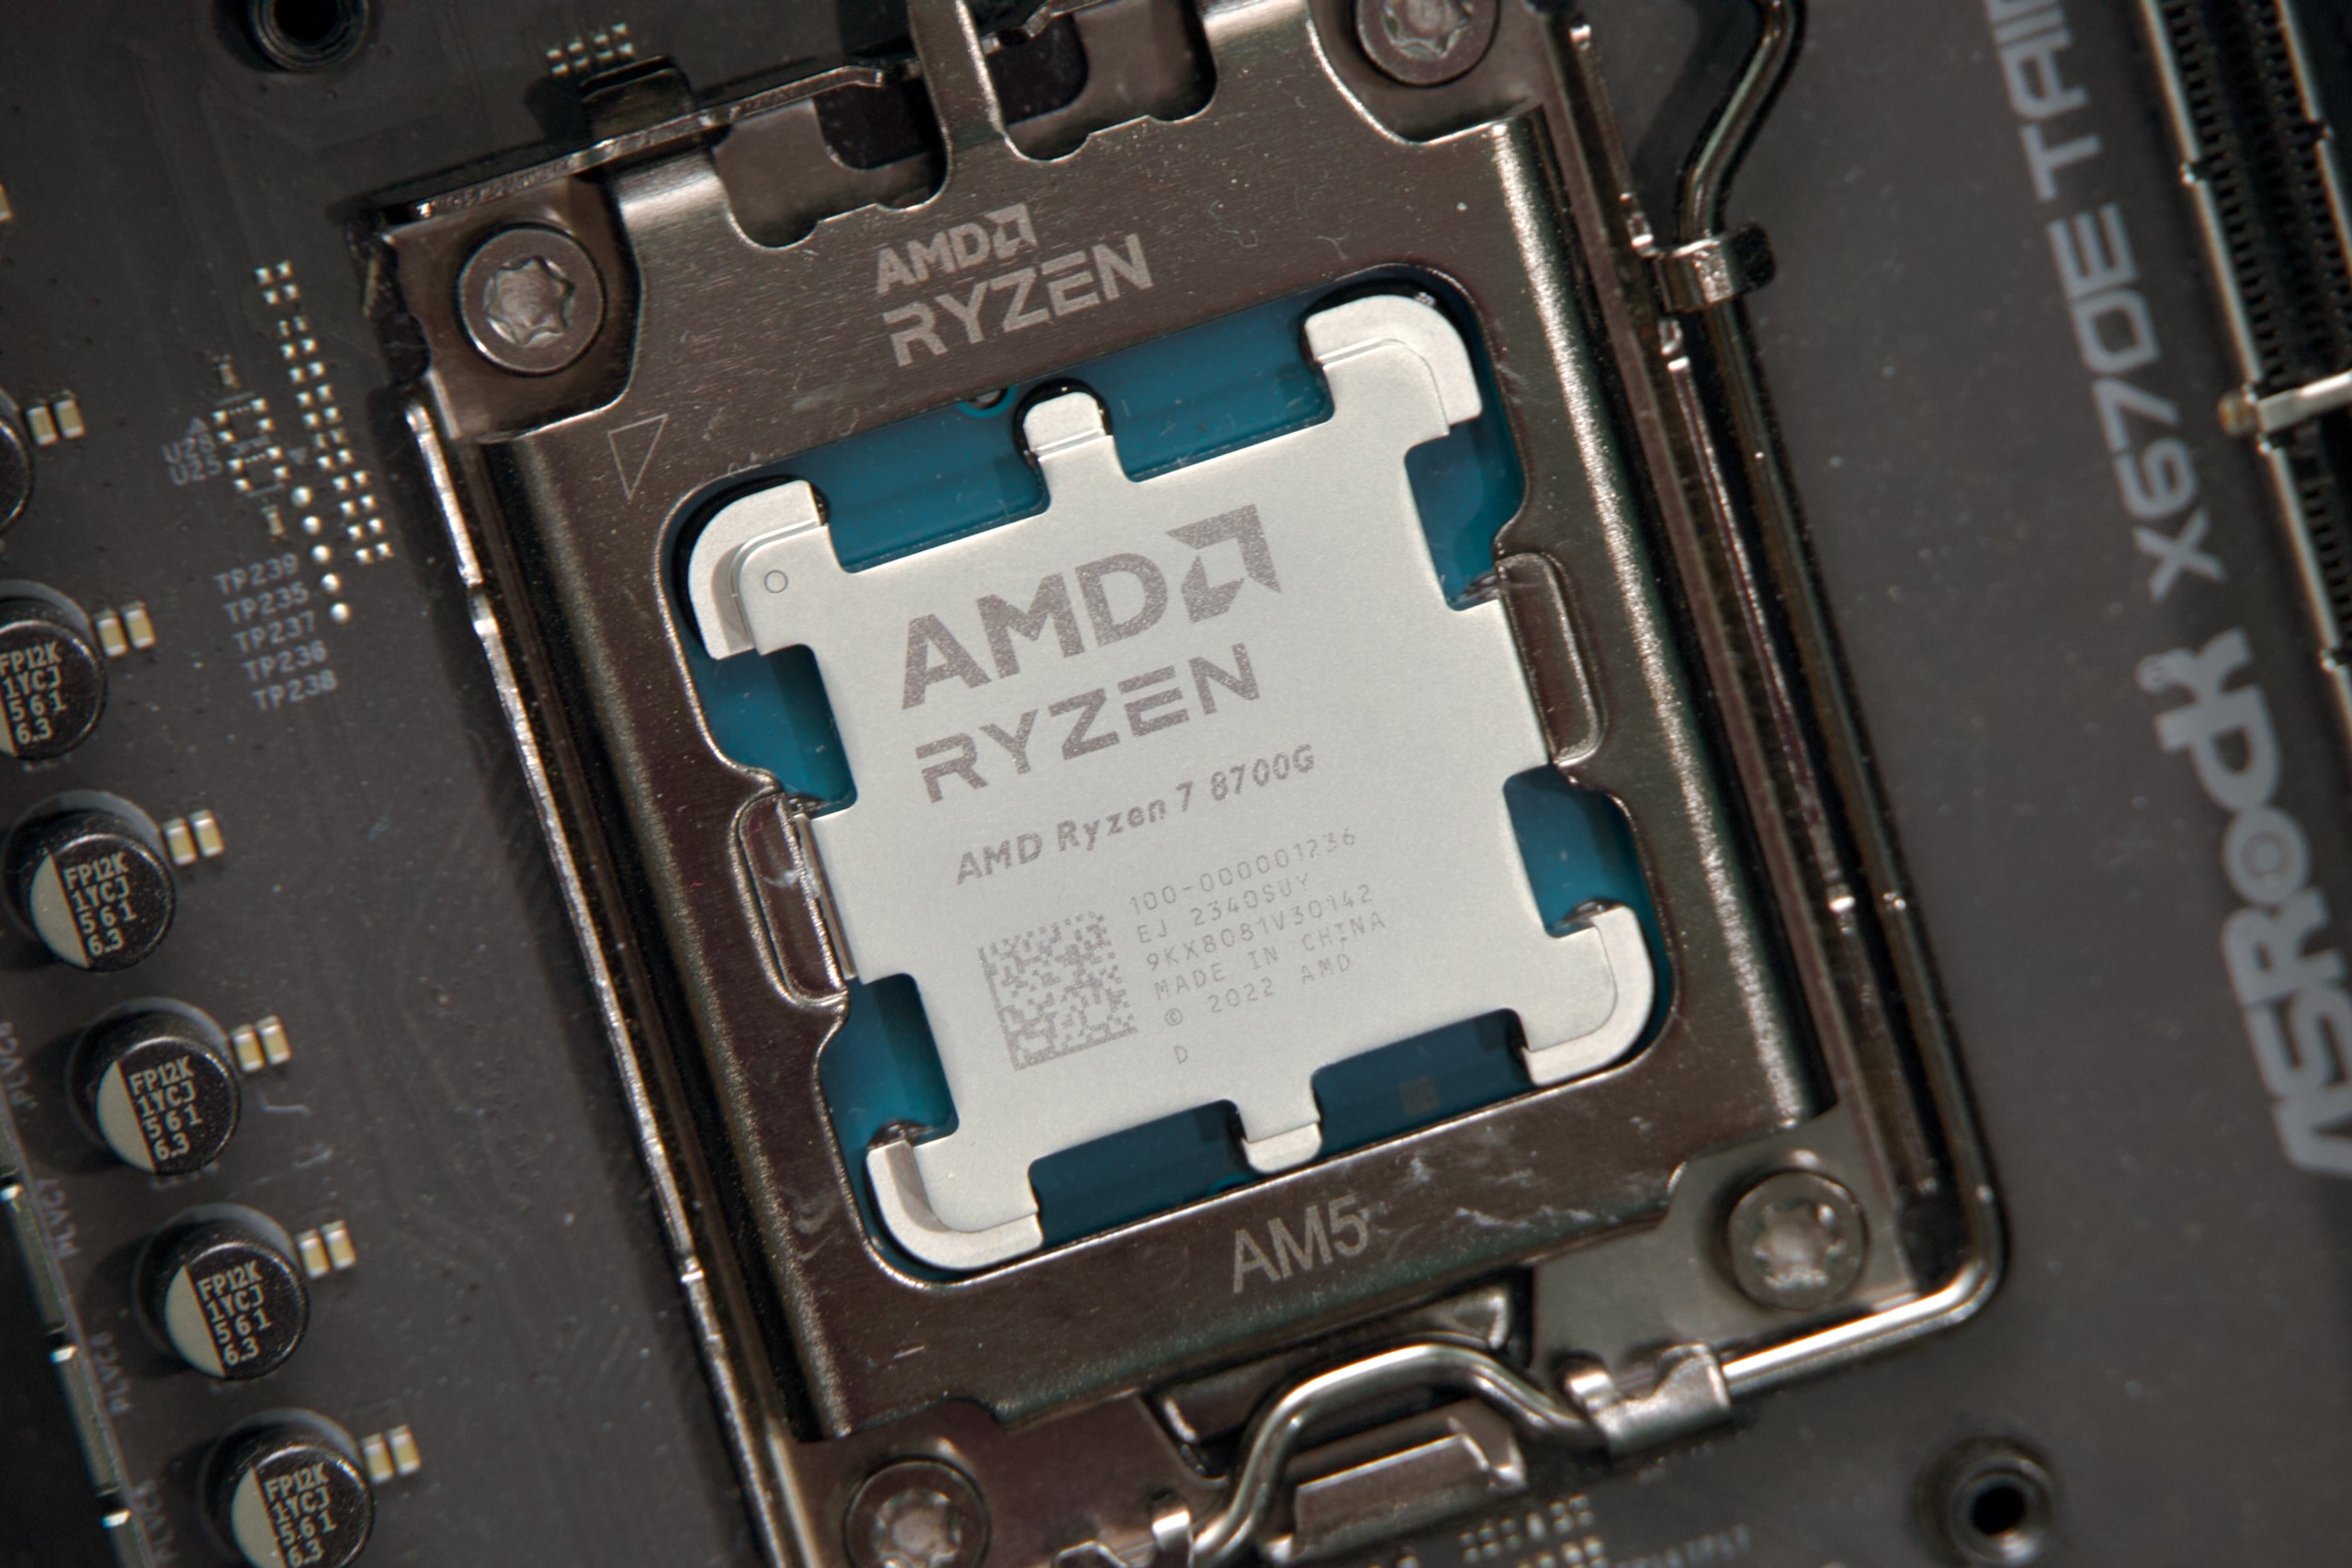 The most interesting thing about AMD's Ryzen 7 8700G CPU is the Radeon 780M GPU that's attached to it. 